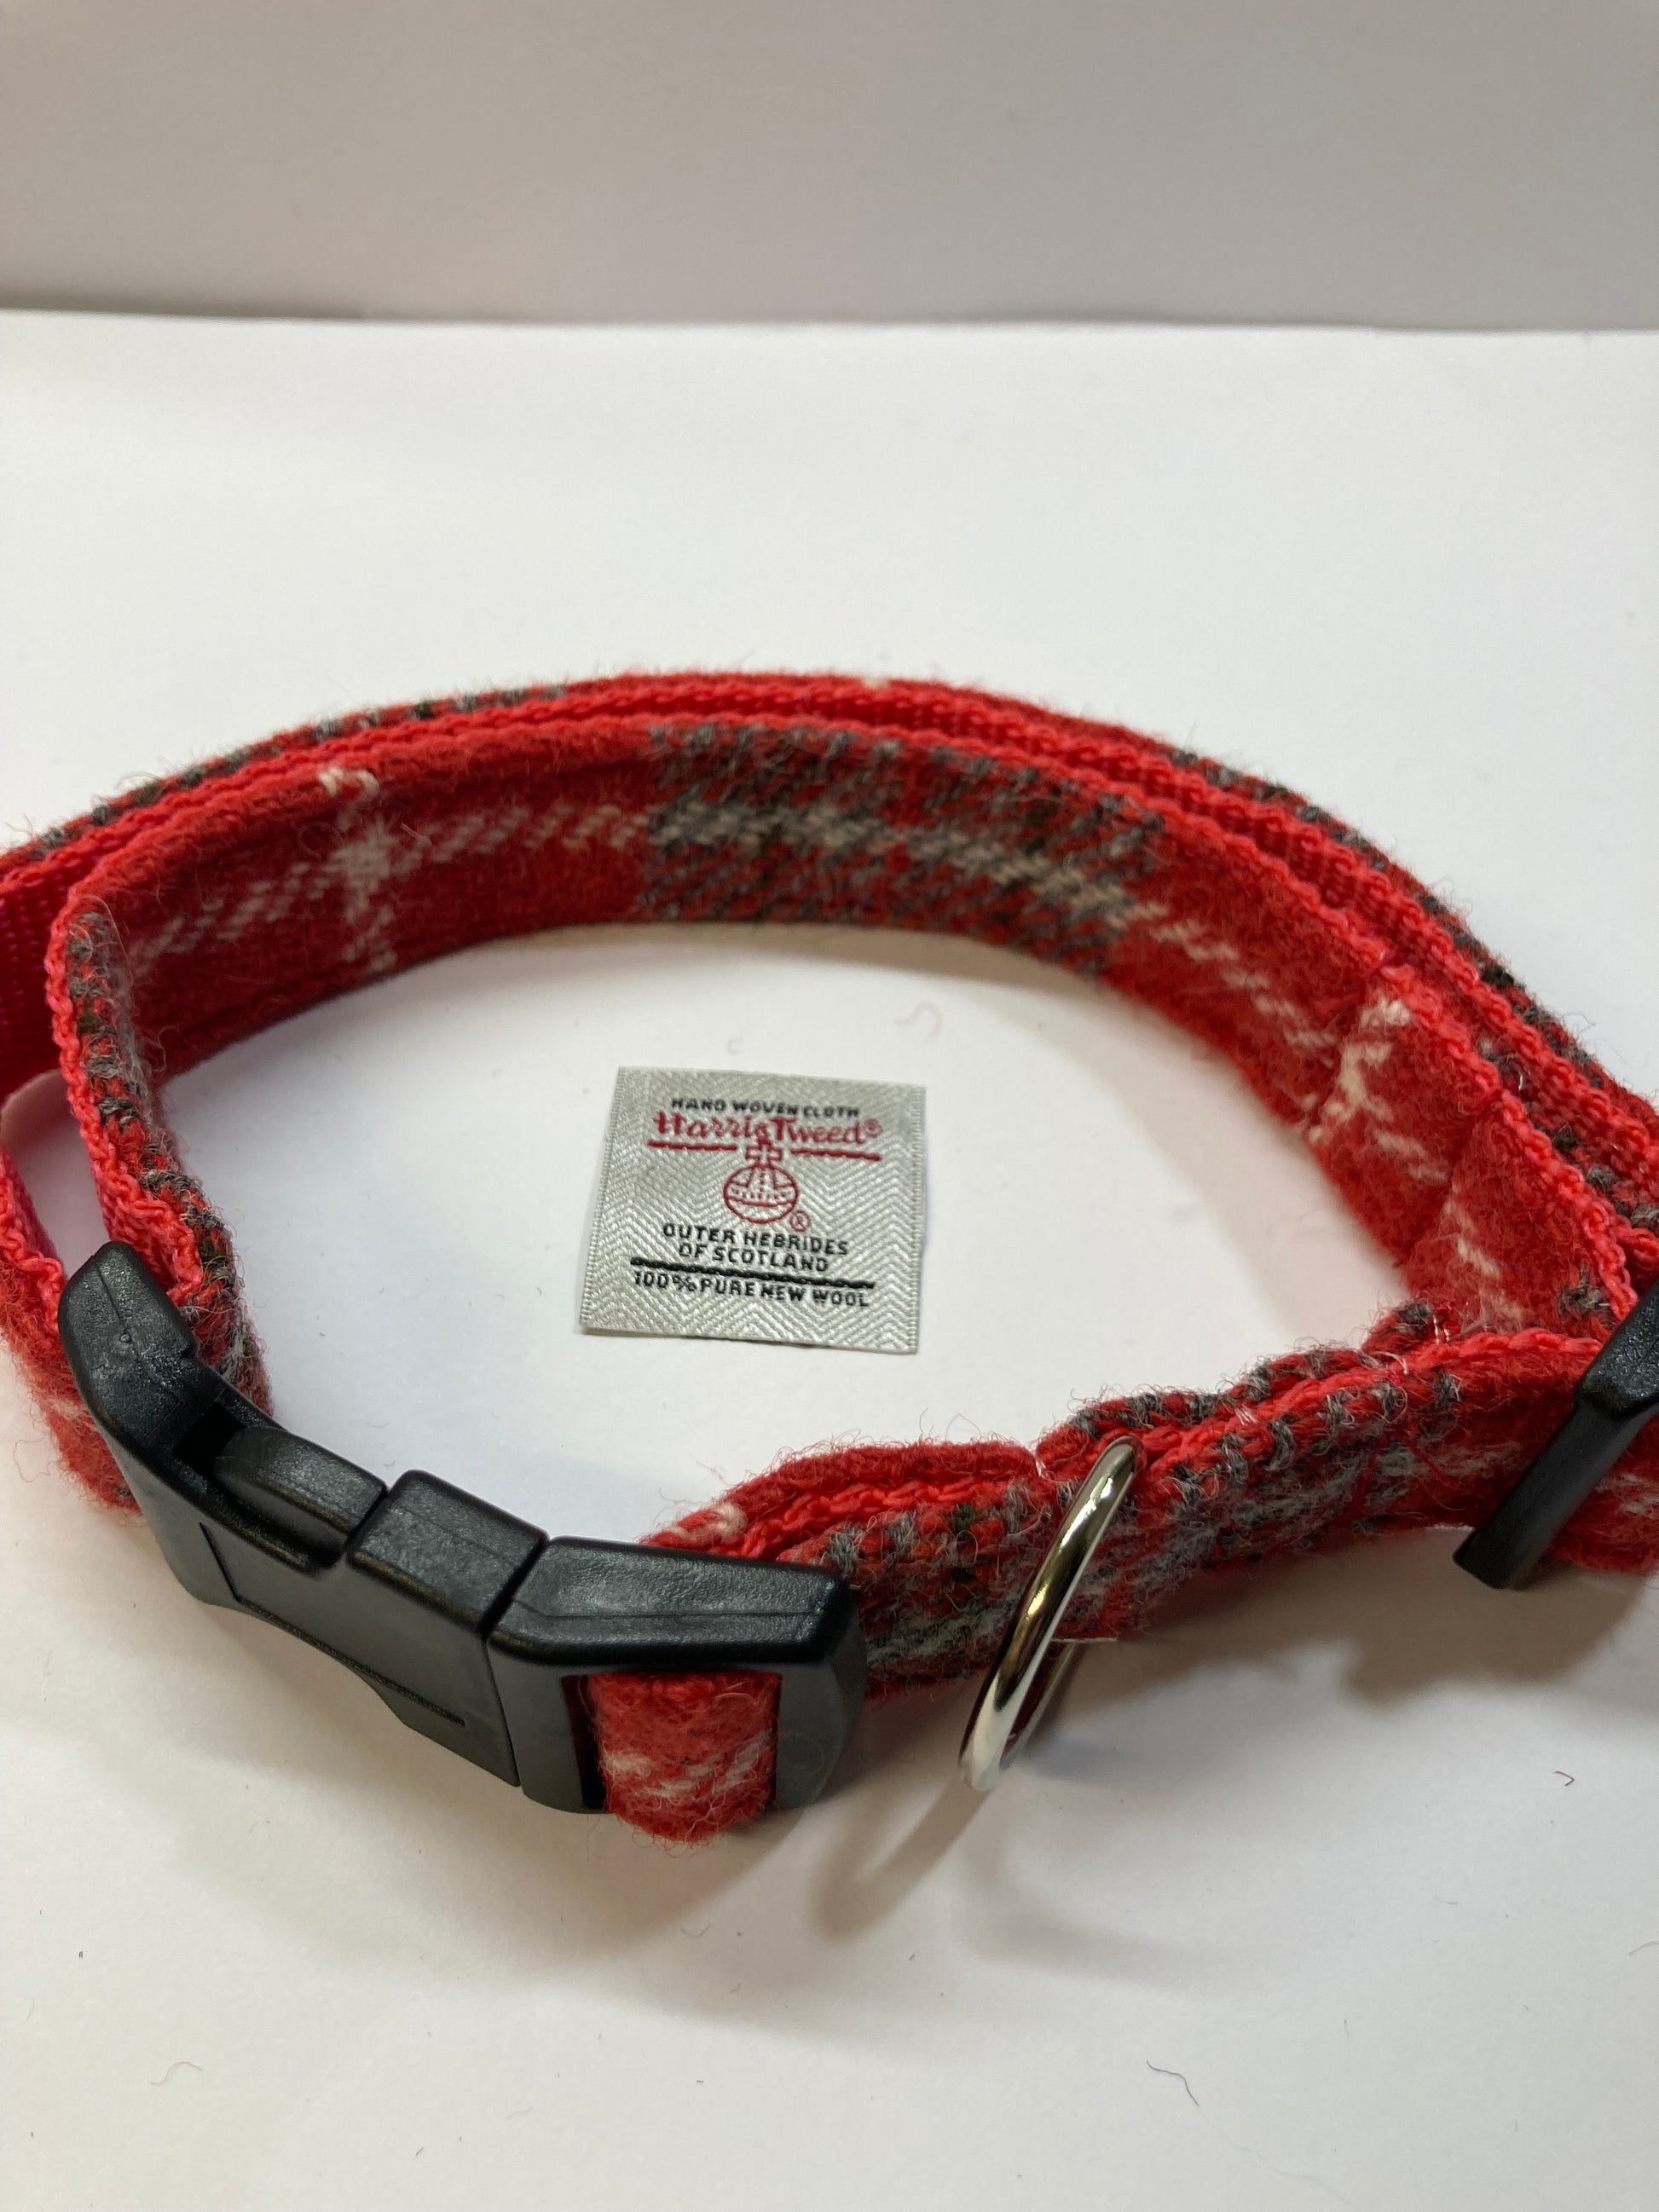 Harris Tweed Dog Collar Red check Front view with Harris Tweed Label